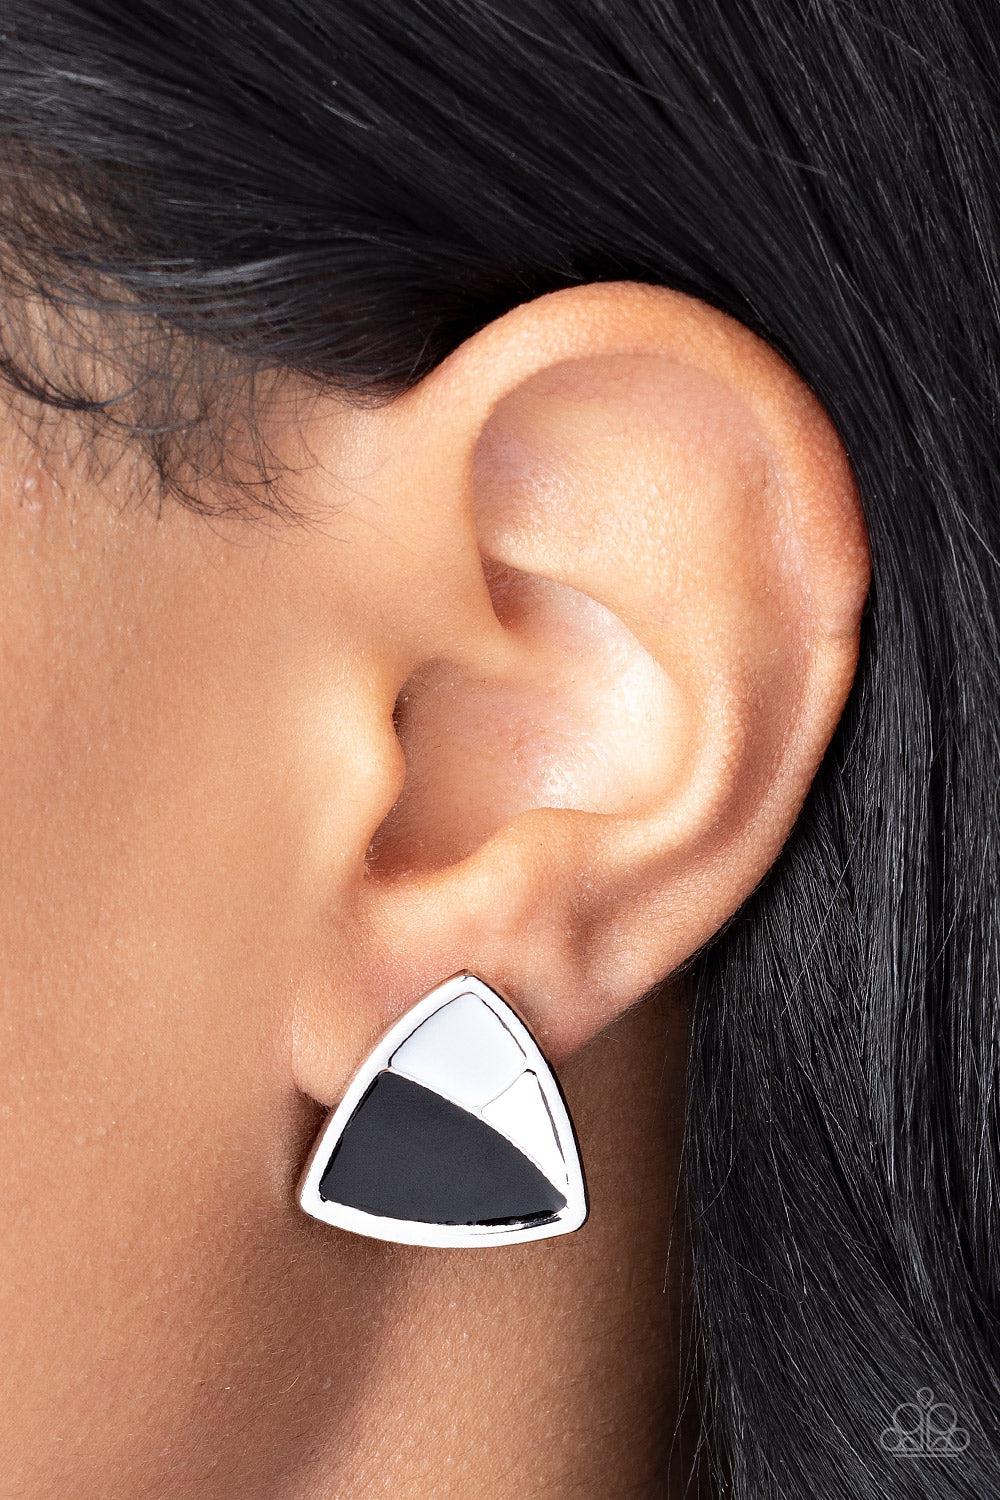 Kaleidoscopic Collision Black &amp; White Earrings - Paparazzi Accessories-on model - CarasShop.com - $5 Jewelry by Cara Jewels